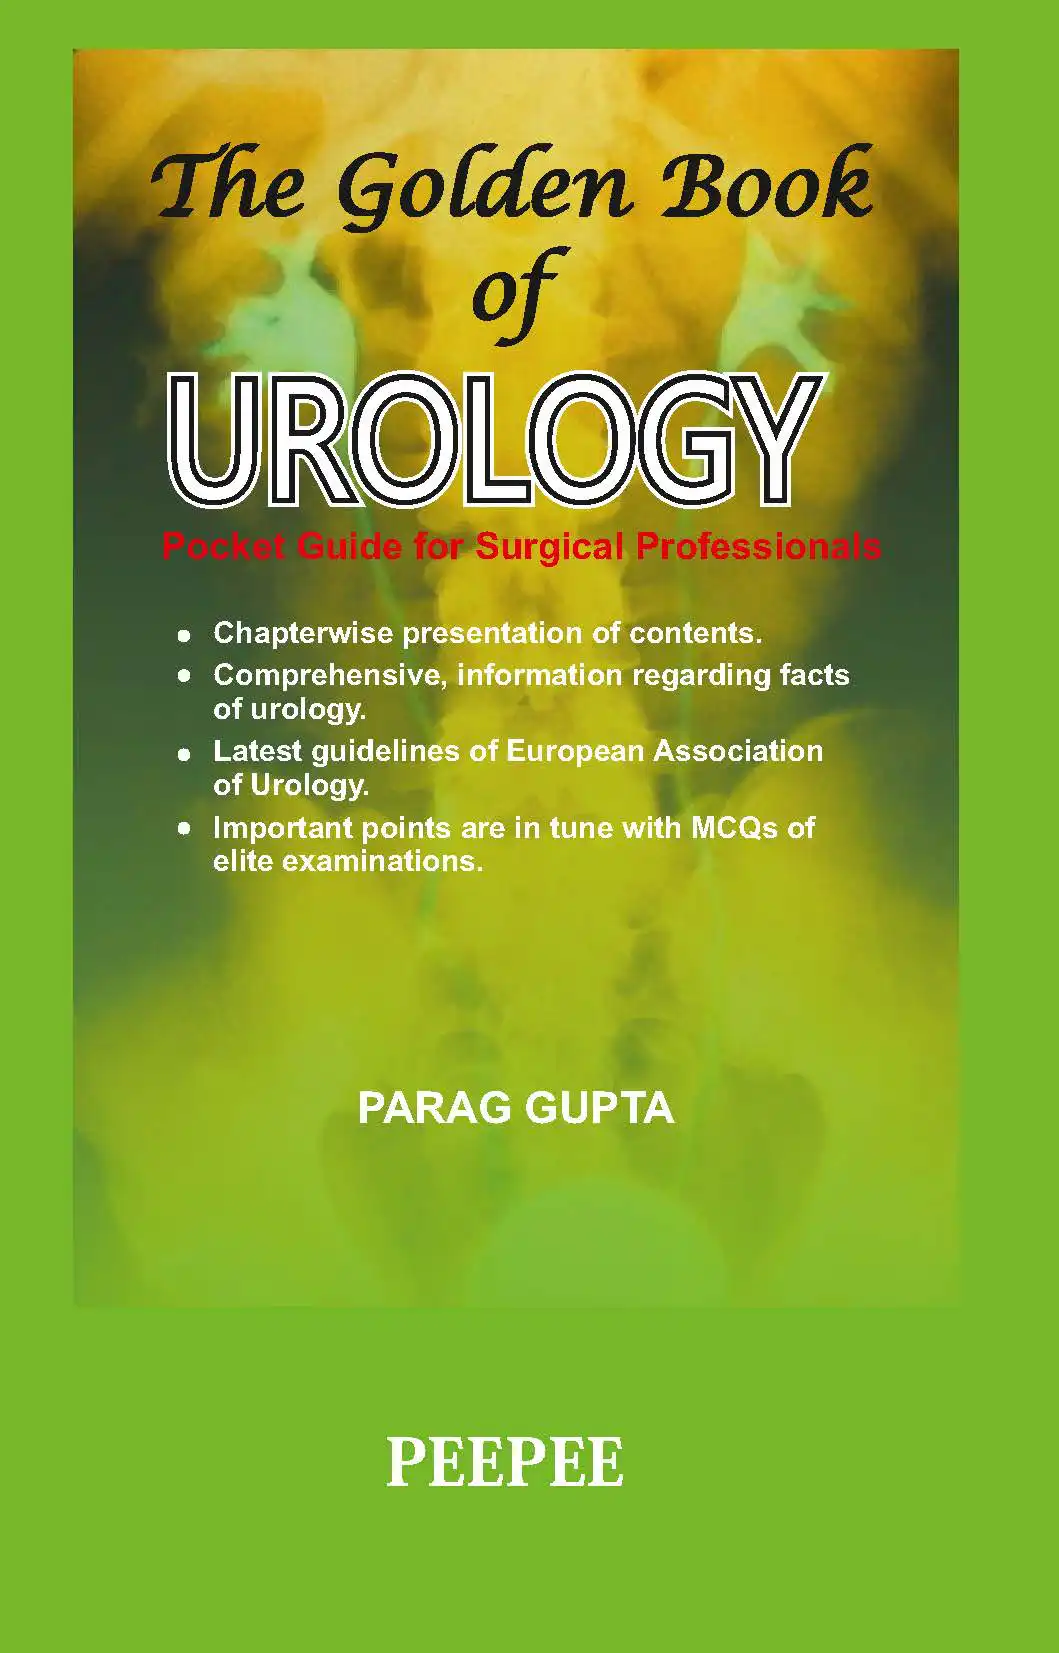 Cover Image of Golden book of Urology